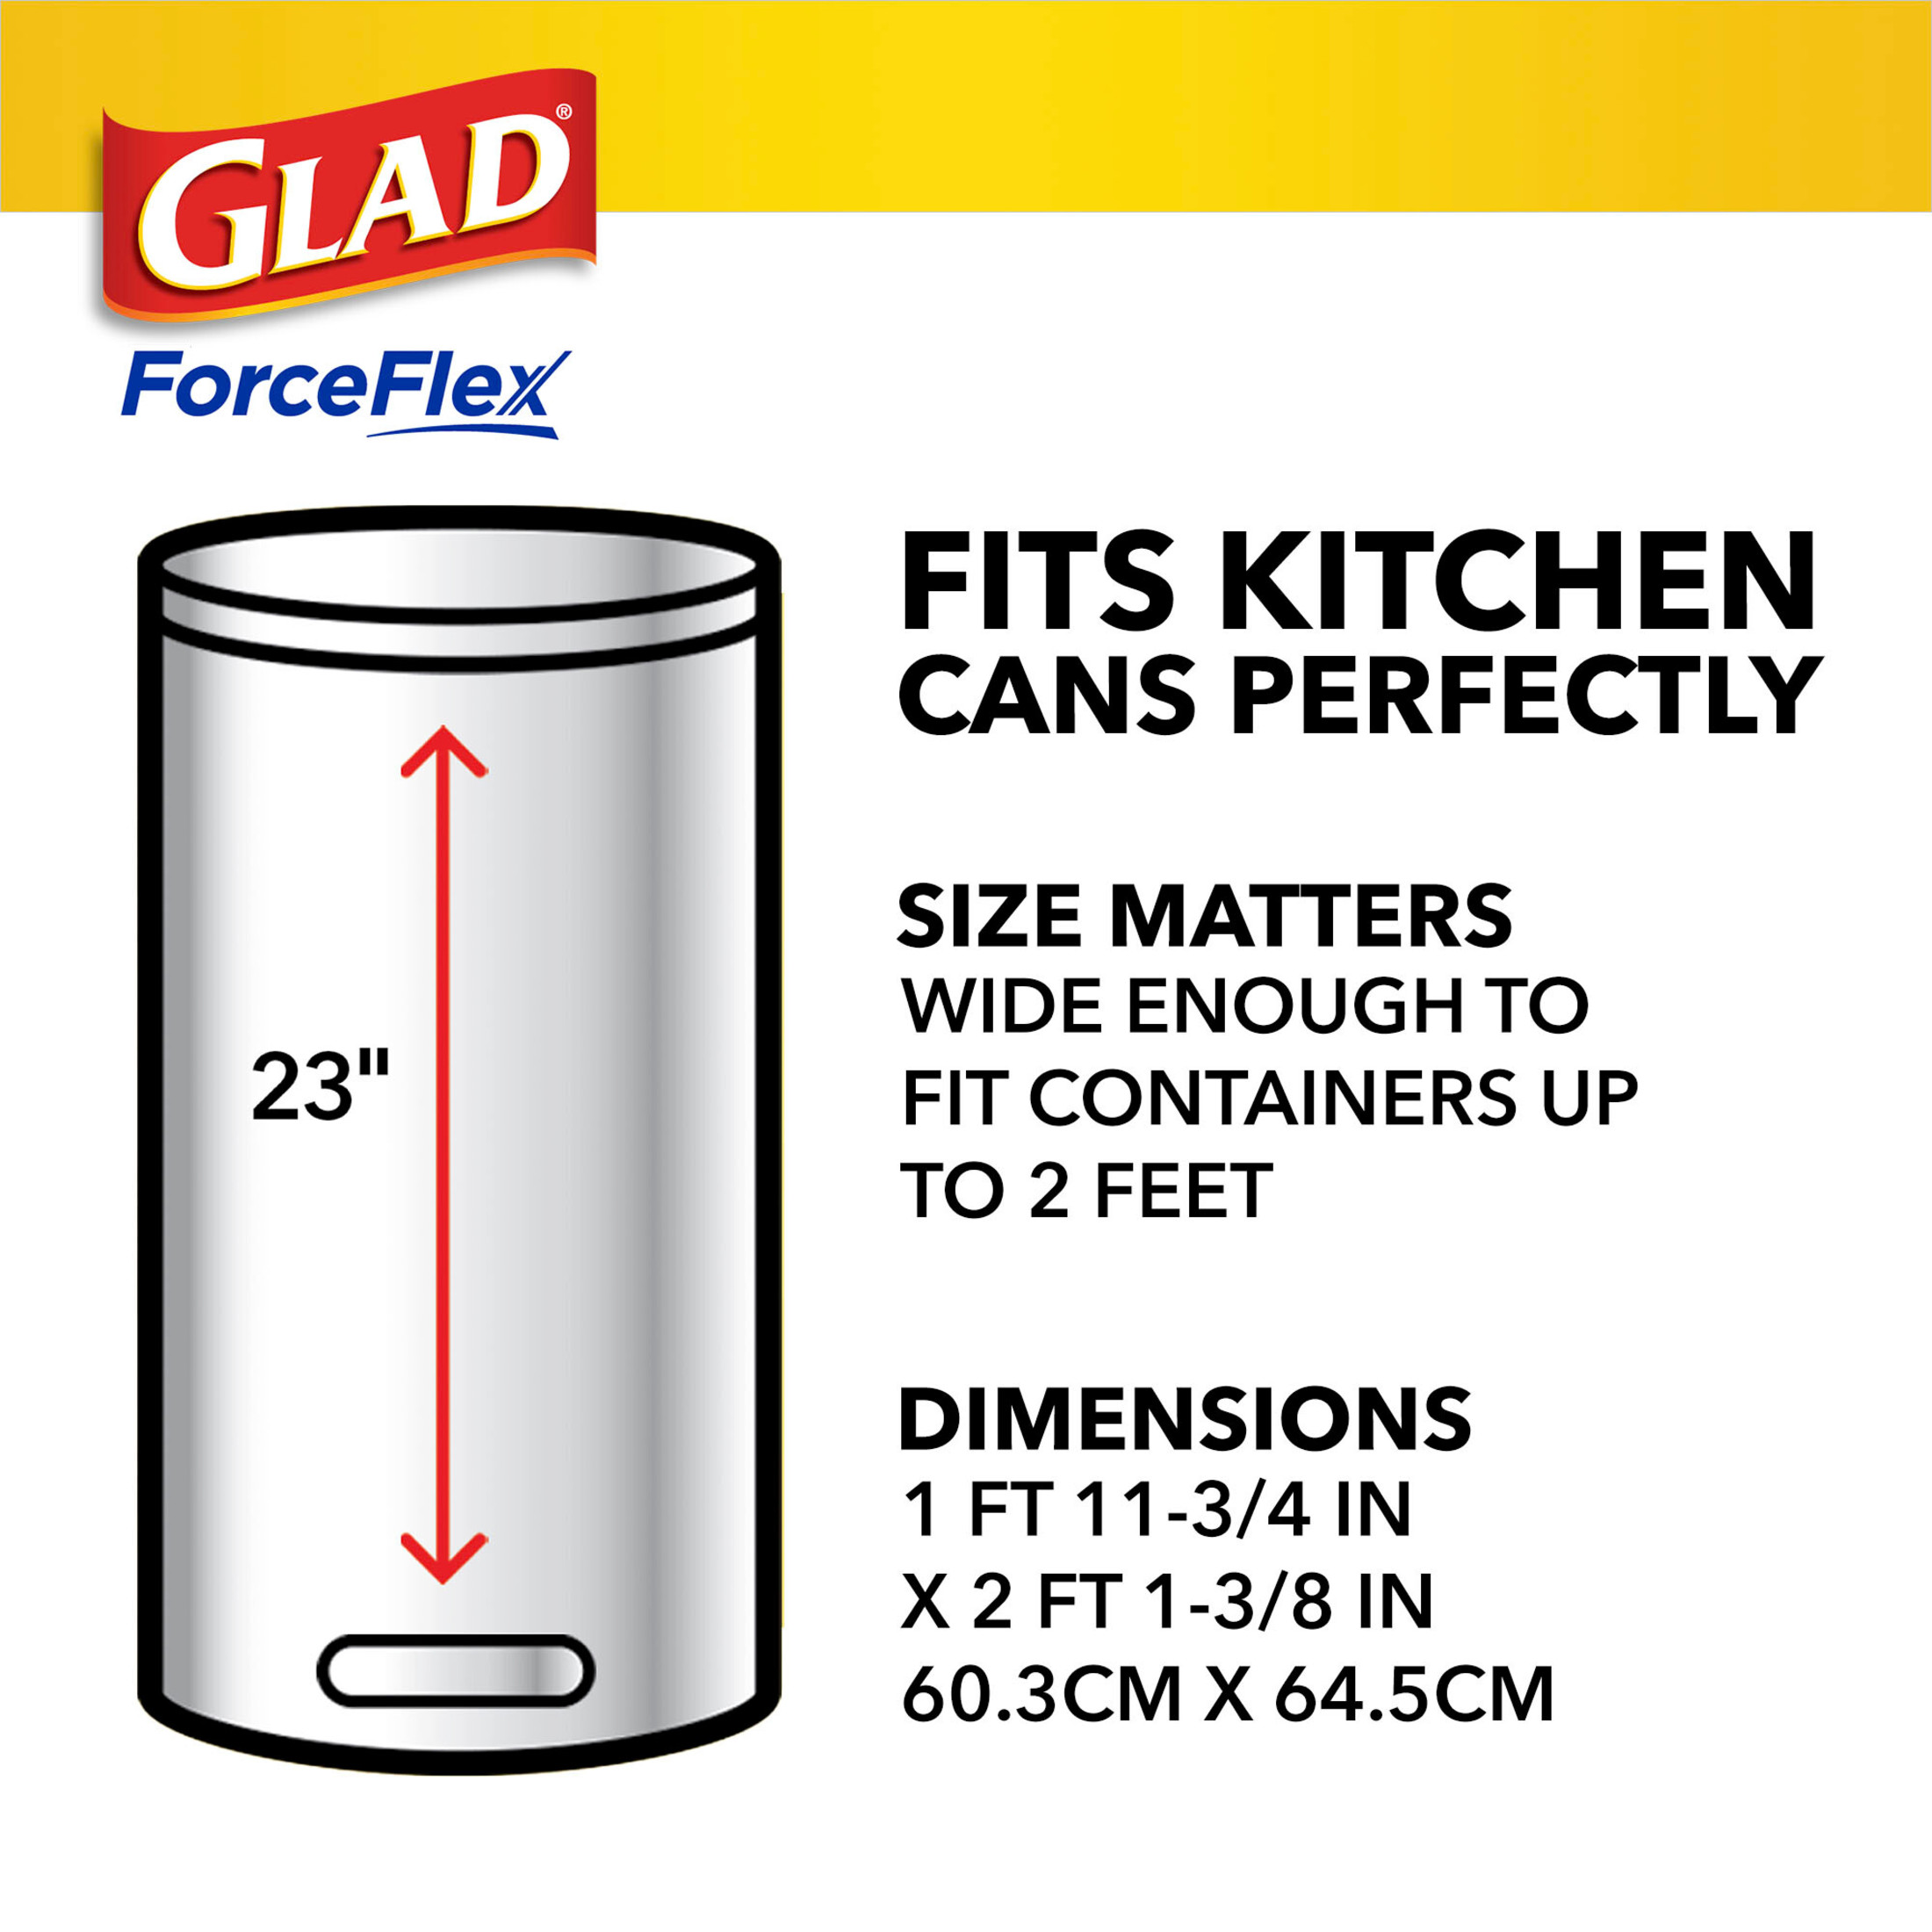 Glad ForceFlex 13-Gallon Tall Kitchen Trash Bags, Fresh Clean Scent with Febreze, 80 Bags - image 4 of 13